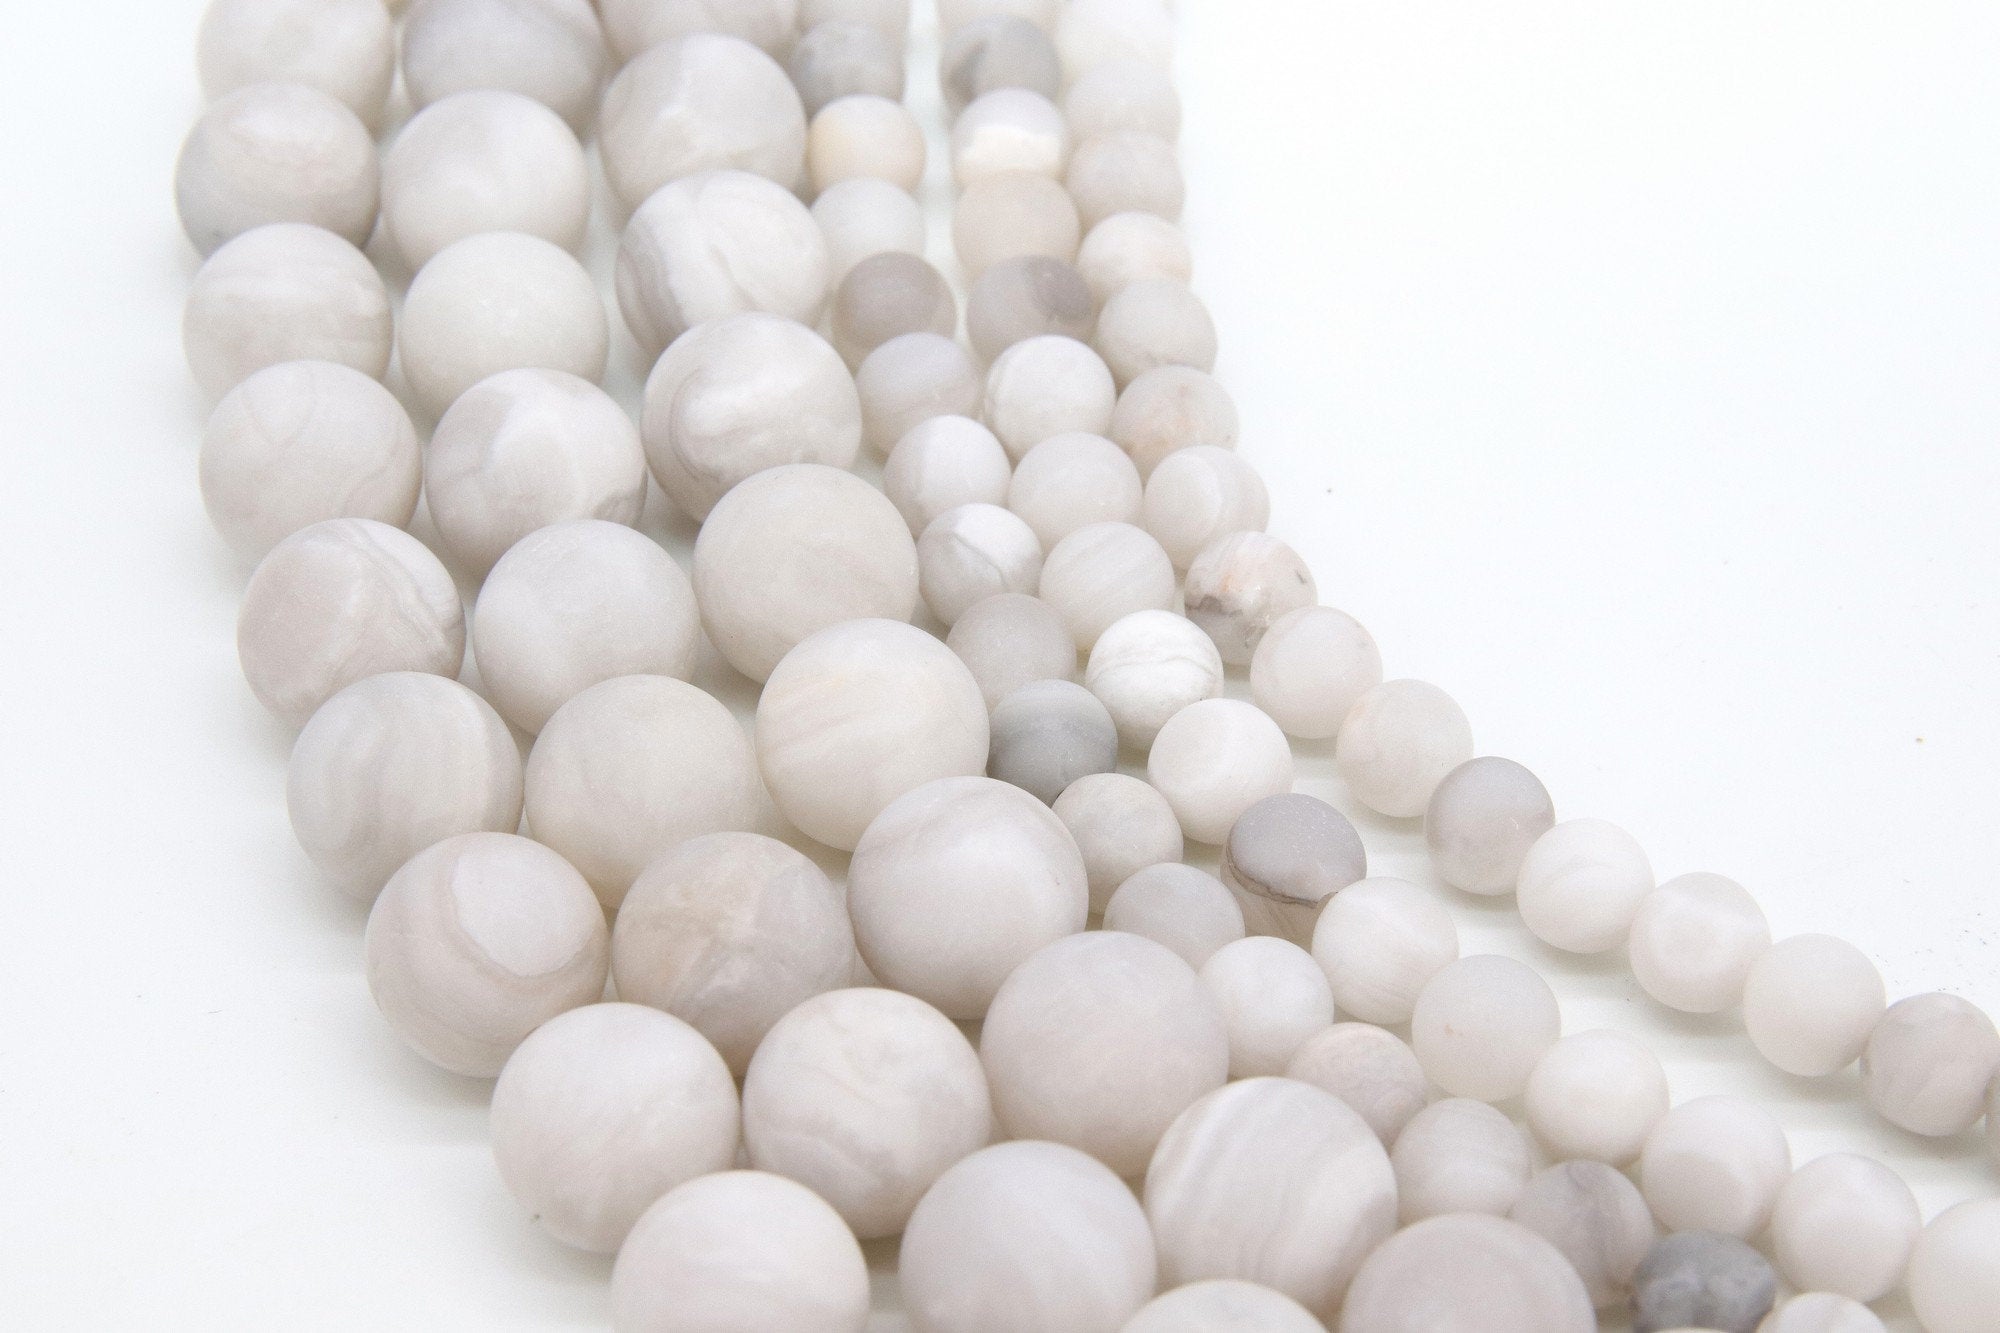 Natural White Agate Beads, Smooth Matte Agate Round Frosted Beads BS #36, sizes in 6 mm 8 mm 10 mm 15 inch Strands